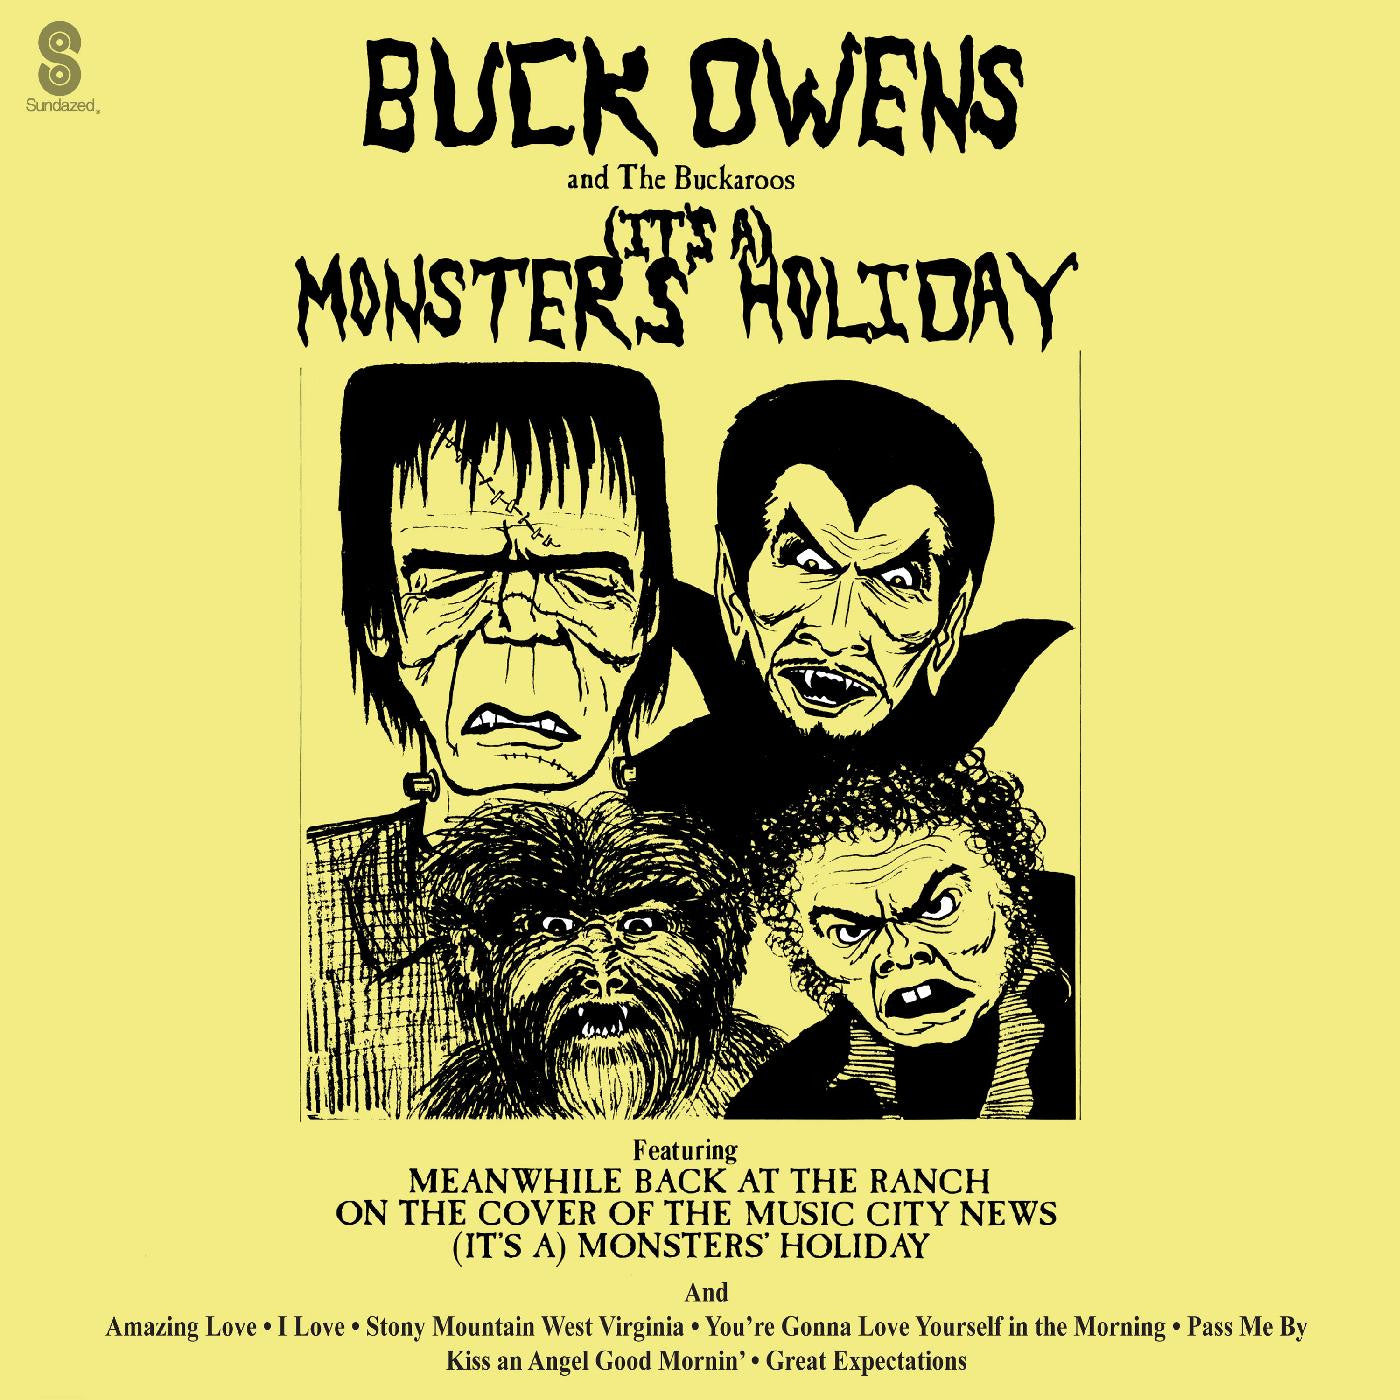 Buck Owens and His Buckaroos - (It's A) Monsters' Holiday - LP